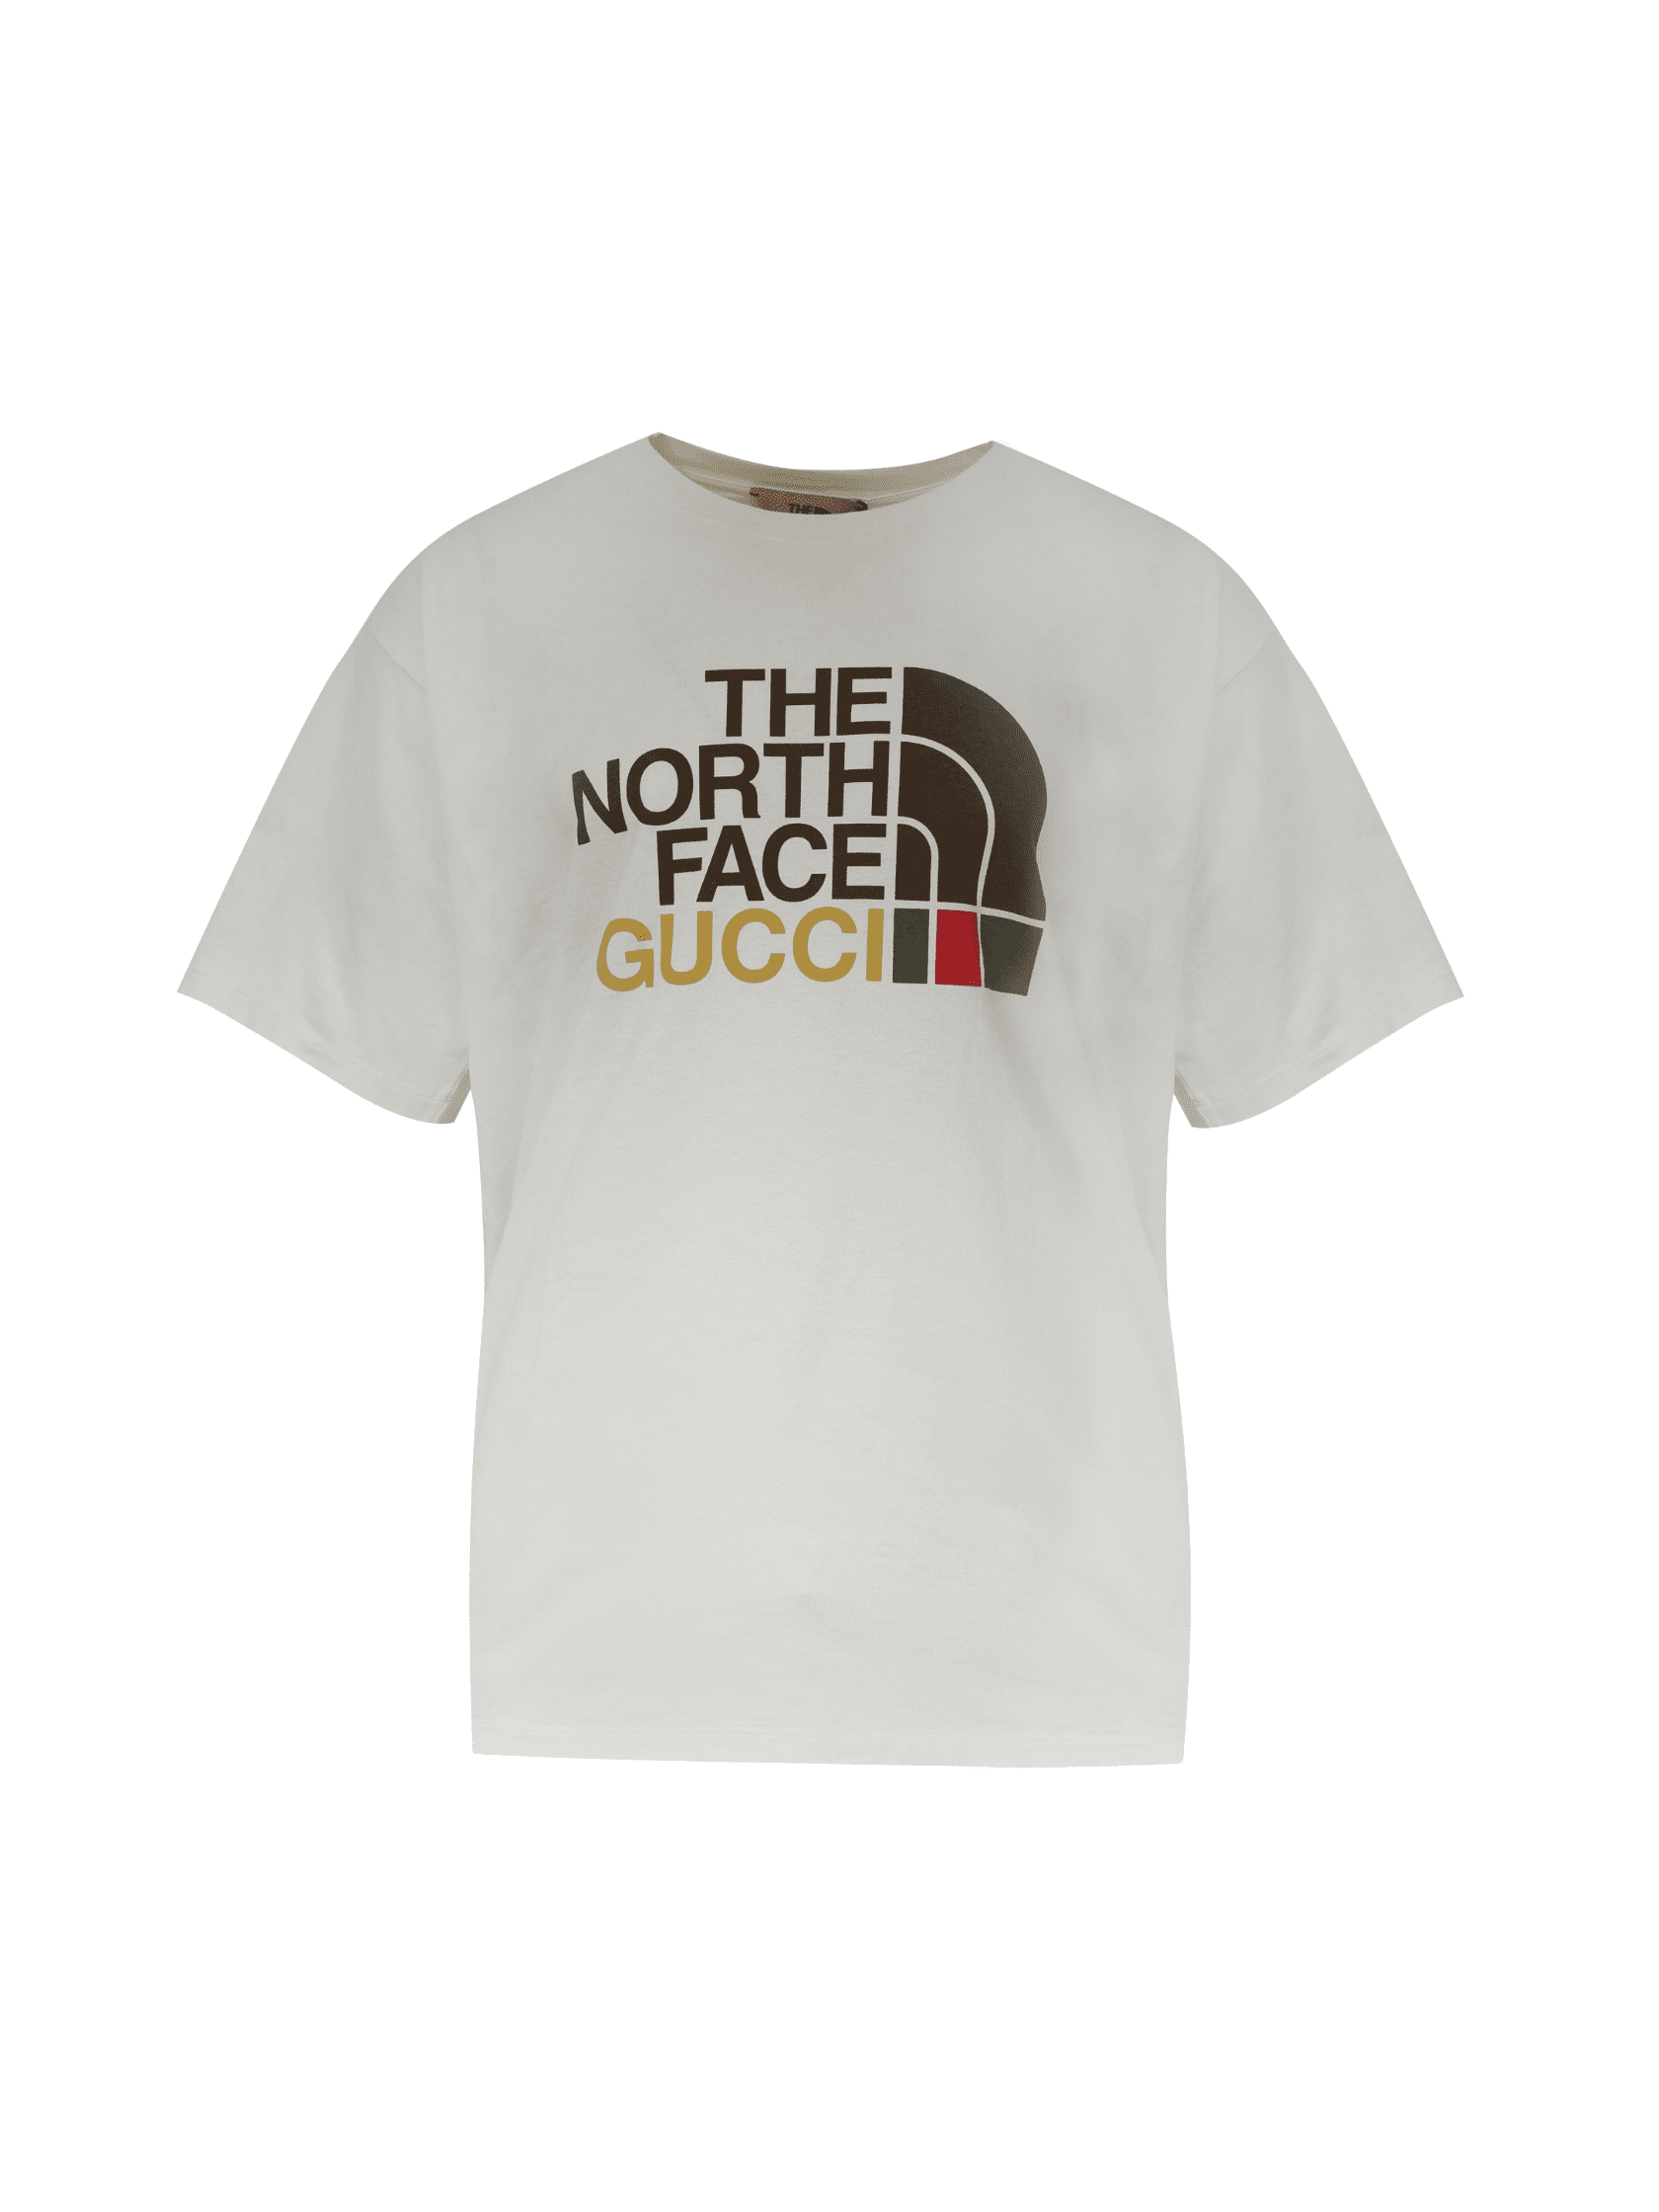 https://cdn.dooca.store/63240/products/camiseta-gucci-x-the-north-face-logo-off-white.png?v=1702923822&webp=0